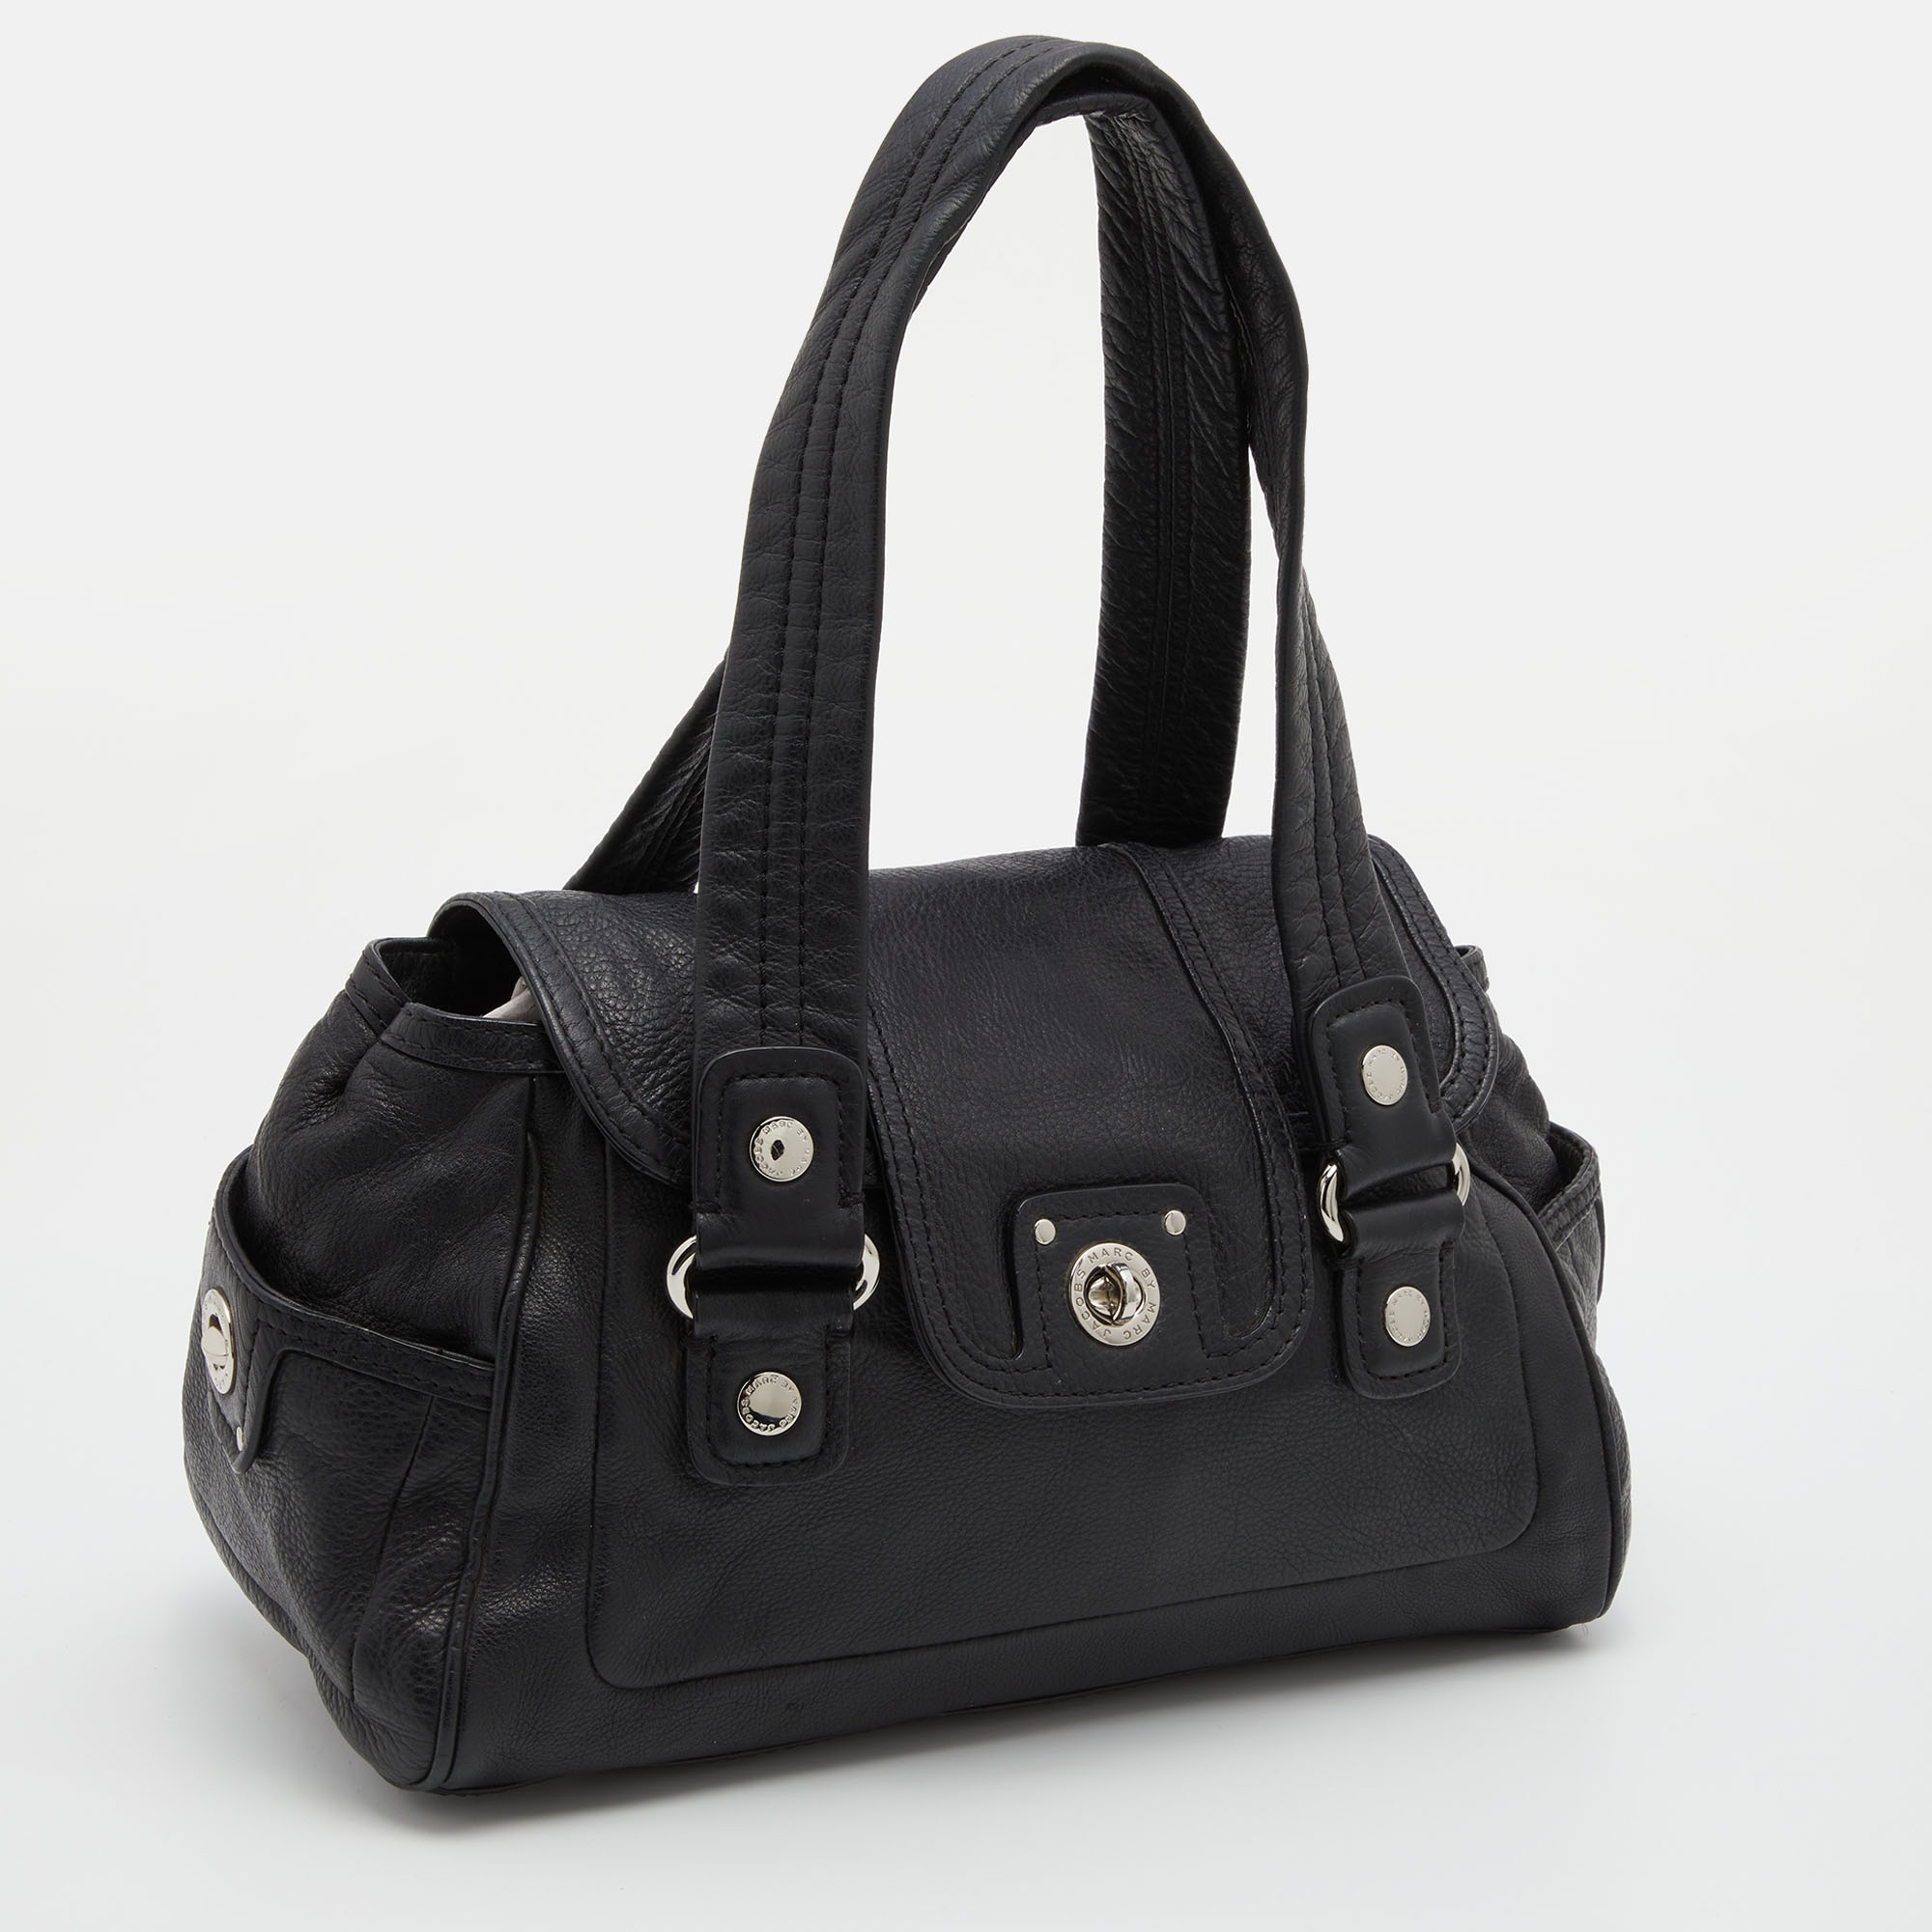 Marc By Marc Jacobs Black Leather Totally Turnlock Benny Satchel